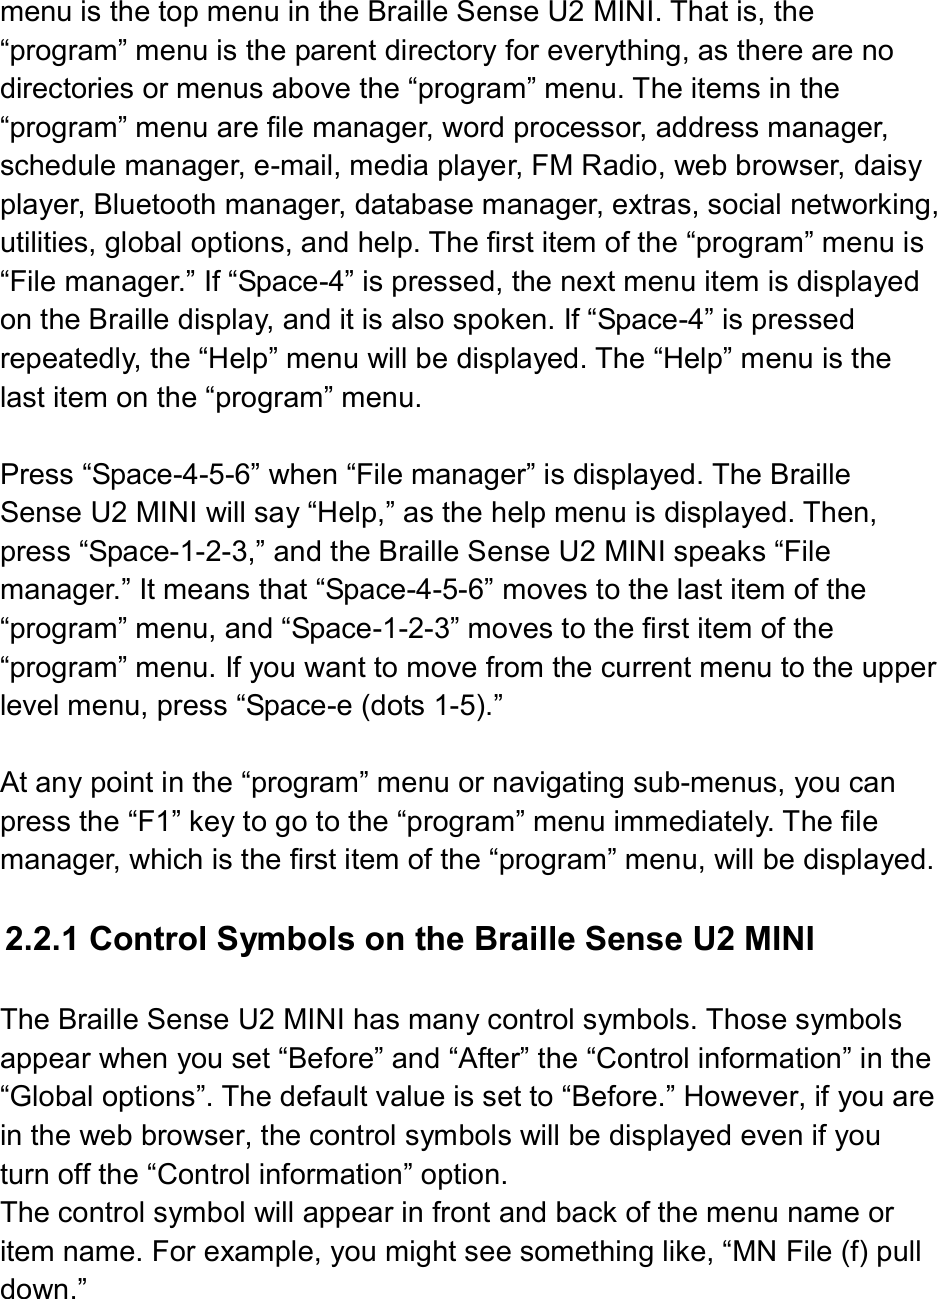  menu is the top menu in the Braille Sense U2 MINI. That is, the “program” menu is the parent directory for everything, as there are no directories or menus above the “program” menu. The items in the “program” menu are file manager, word processor, address manager, schedule manager, e-mail, media player, FM Radio, web browser, daisy player, Bluetooth manager, database manager, extras, social networking, utilities, global options, and help. The first item of the “program” menu is “File manager.” If “Space-4” is pressed, the next menu item is displayed on the Braille display, and it is also spoken. If “Space-4” is pressed repeatedly, the “Help” menu will be displayed. The “Help” menu is the last item on the “program” menu.  Press “Space-4-5-6” when “File manager” is displayed. The Braille Sense U2 MINI will say “Help,” as the help menu is displayed. Then, press “Space-1-2-3,” and the Braille Sense U2 MINI speaks “File manager.” It means that “Space-4-5-6” moves to the last item of the “program” menu, and “Space-1-2-3” moves to the first item of the “program” menu. If you want to move from the current menu to the upper level menu, press “Space-e (dots 1-5).”  At any point in the “program” menu or navigating sub-menus, you can press the “F1” key to go to the “program” menu immediately. The file manager, which is the first item of the “program” menu, will be displayed.  2.2.1 Control Symbols on the Braille Sense U2 MINI  The Braille Sense U2 MINI has many control symbols. Those symbols appear when you set “Before” and “After” the “Control information” in the “Global options”. The default value is set to “Before.” However, if you are in the web browser, the control symbols will be displayed even if you turn off the “Control information” option.   The control symbol will appear in front and back of the menu name or item name. For example, you might see something like, “MN File (f) pull down.”  